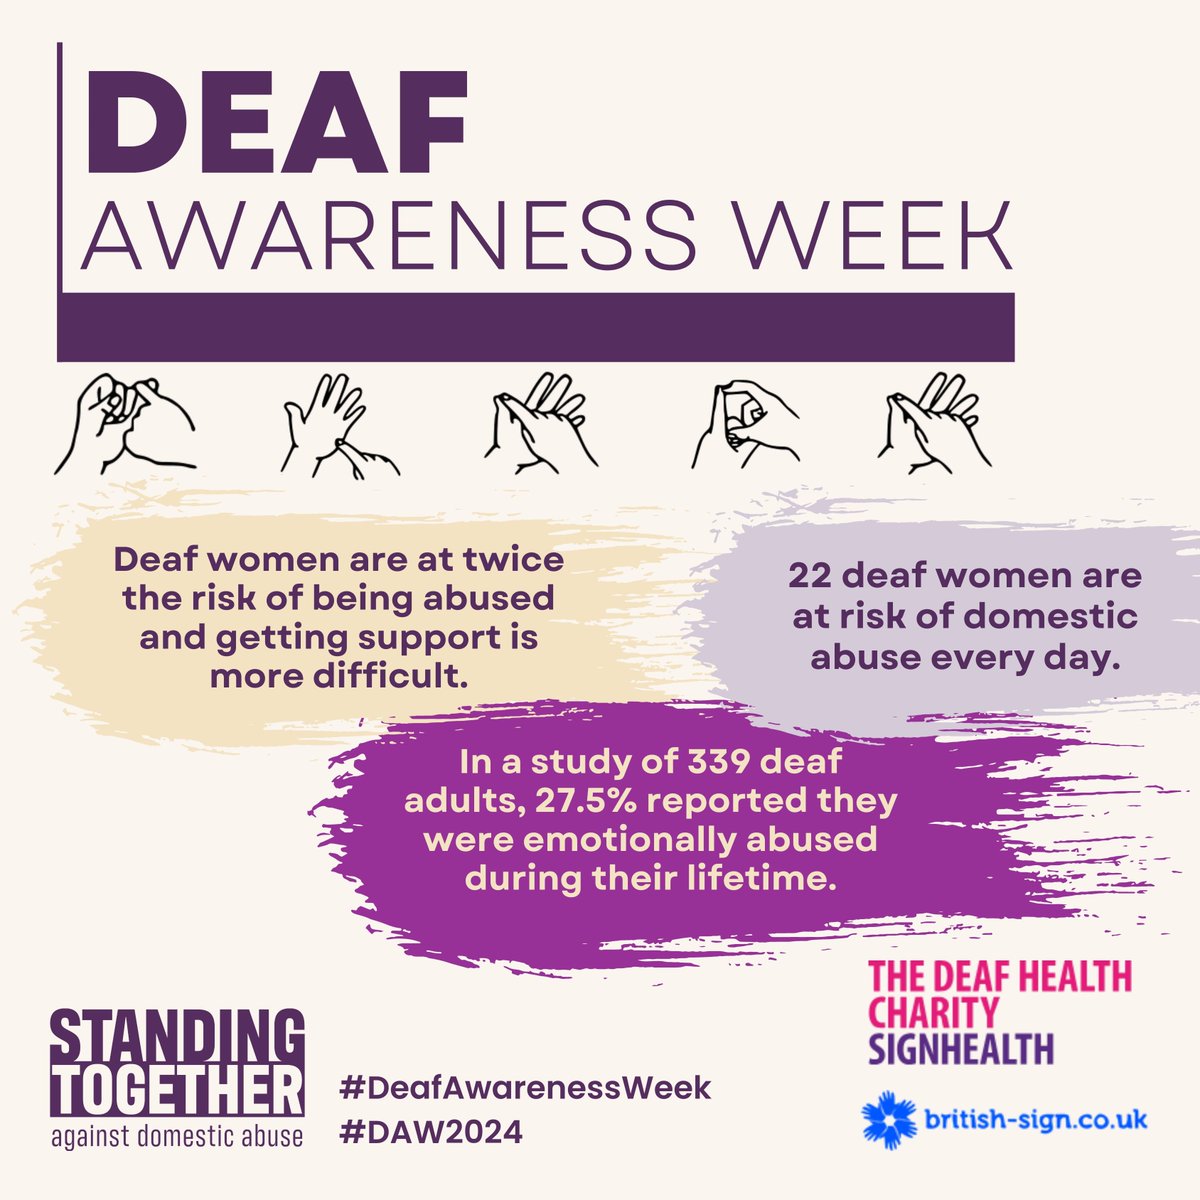 We need to remove barriers to support. We work closely with partners to improve our coordinated multi-agency response so that access is available to all. Help us spread awareness this #DeafAwarenessWeek & beyond. See @signhealth for resources: signhealth.org.uk/for-profession… #DAW2024